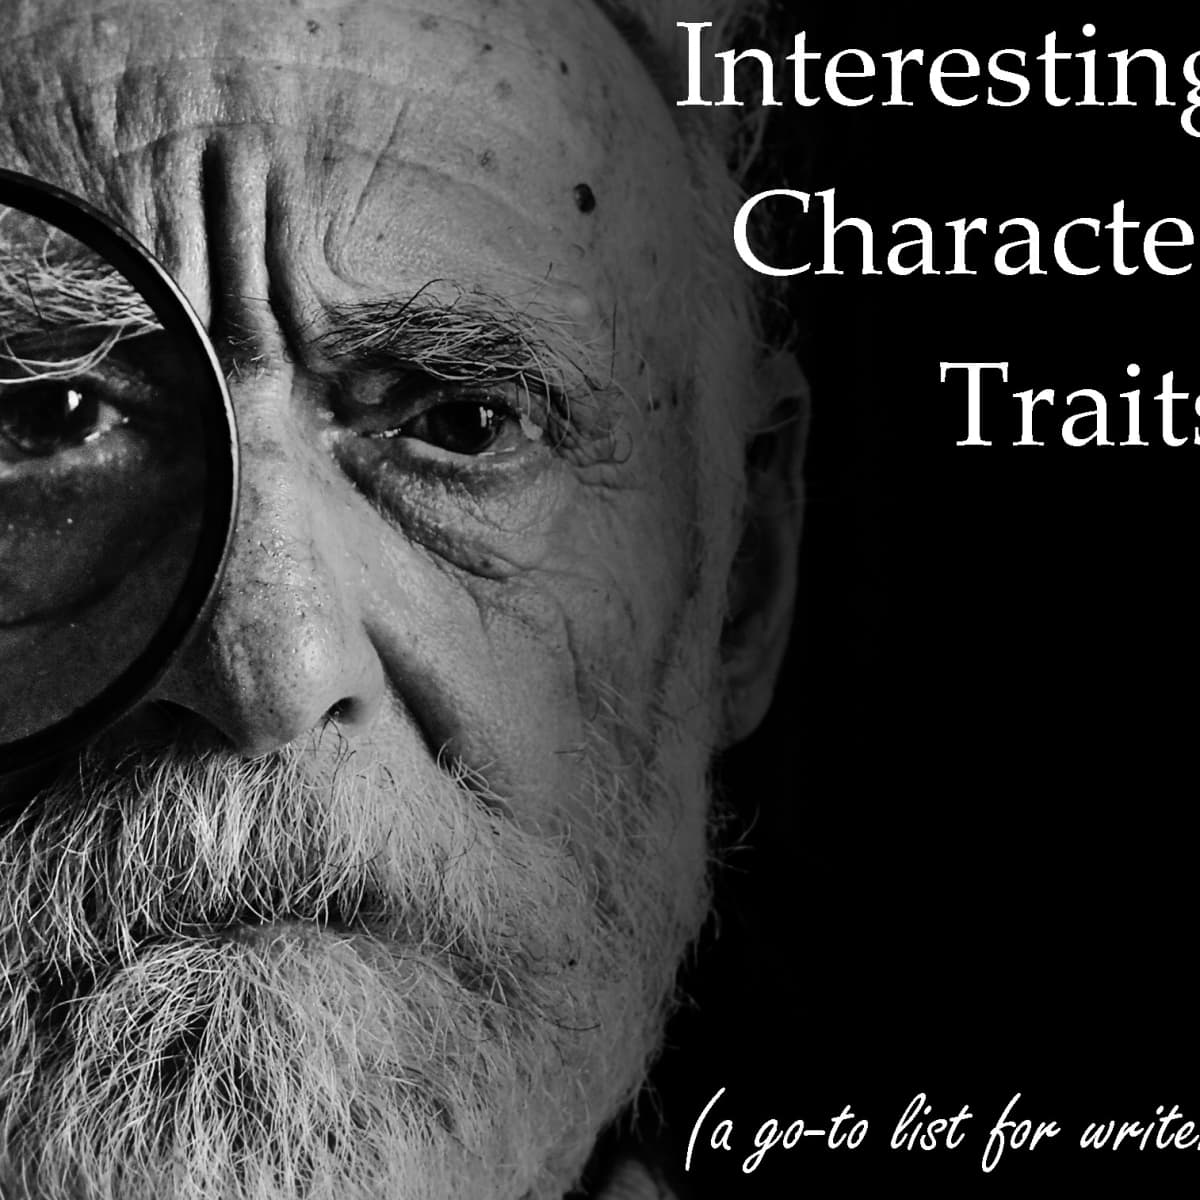 Characteristics For Characters